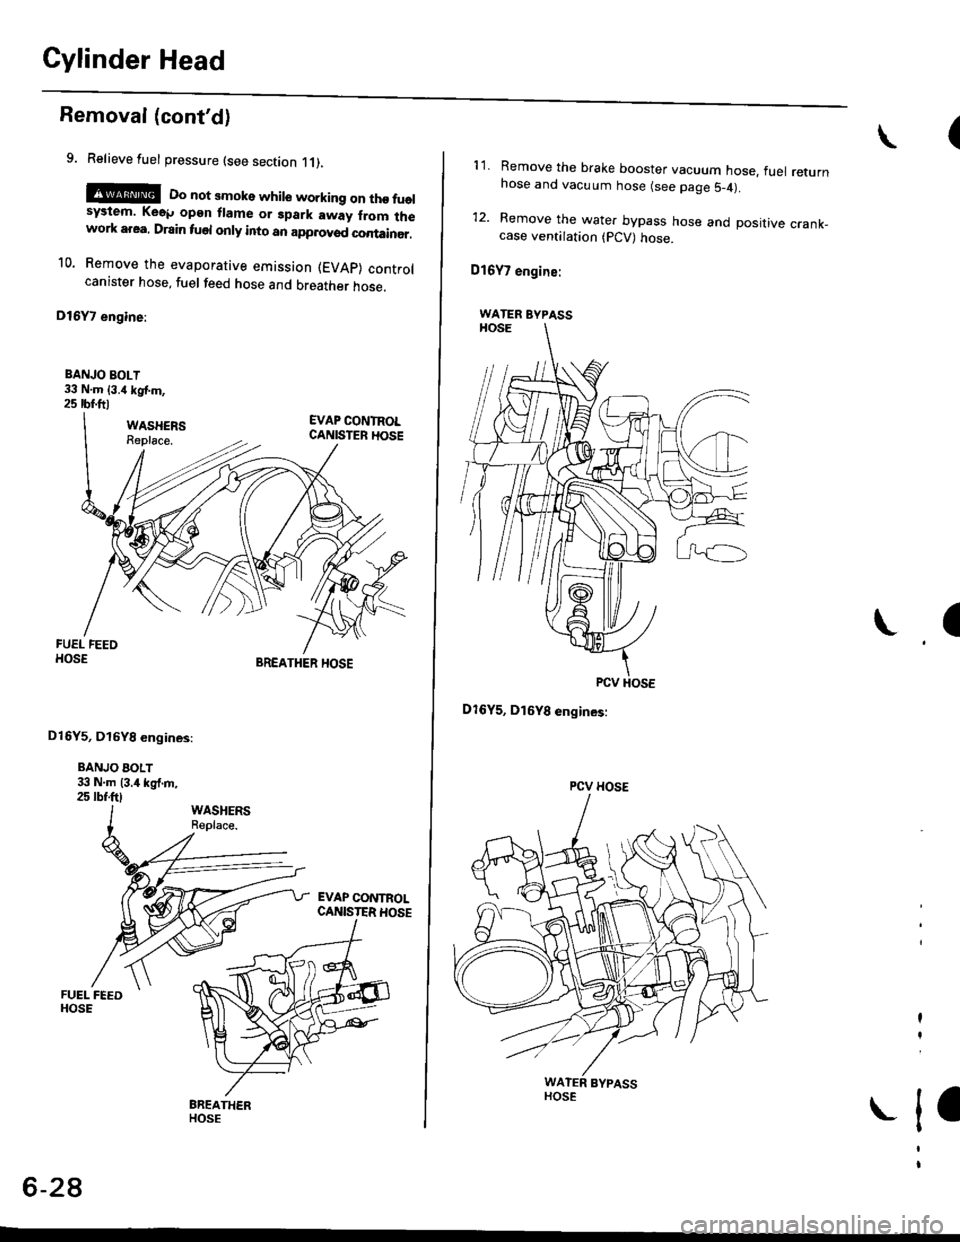 HONDA CIVIC 1998 6.G Service Manual Cylinder Head
Removal (contd)
9. Relieve fuel pressure (see section 11),
E@E Do not smoke while working on tho fuelsystem. Ke6p opgn flame or gpark away from lhework area, Drain fuel only into an app